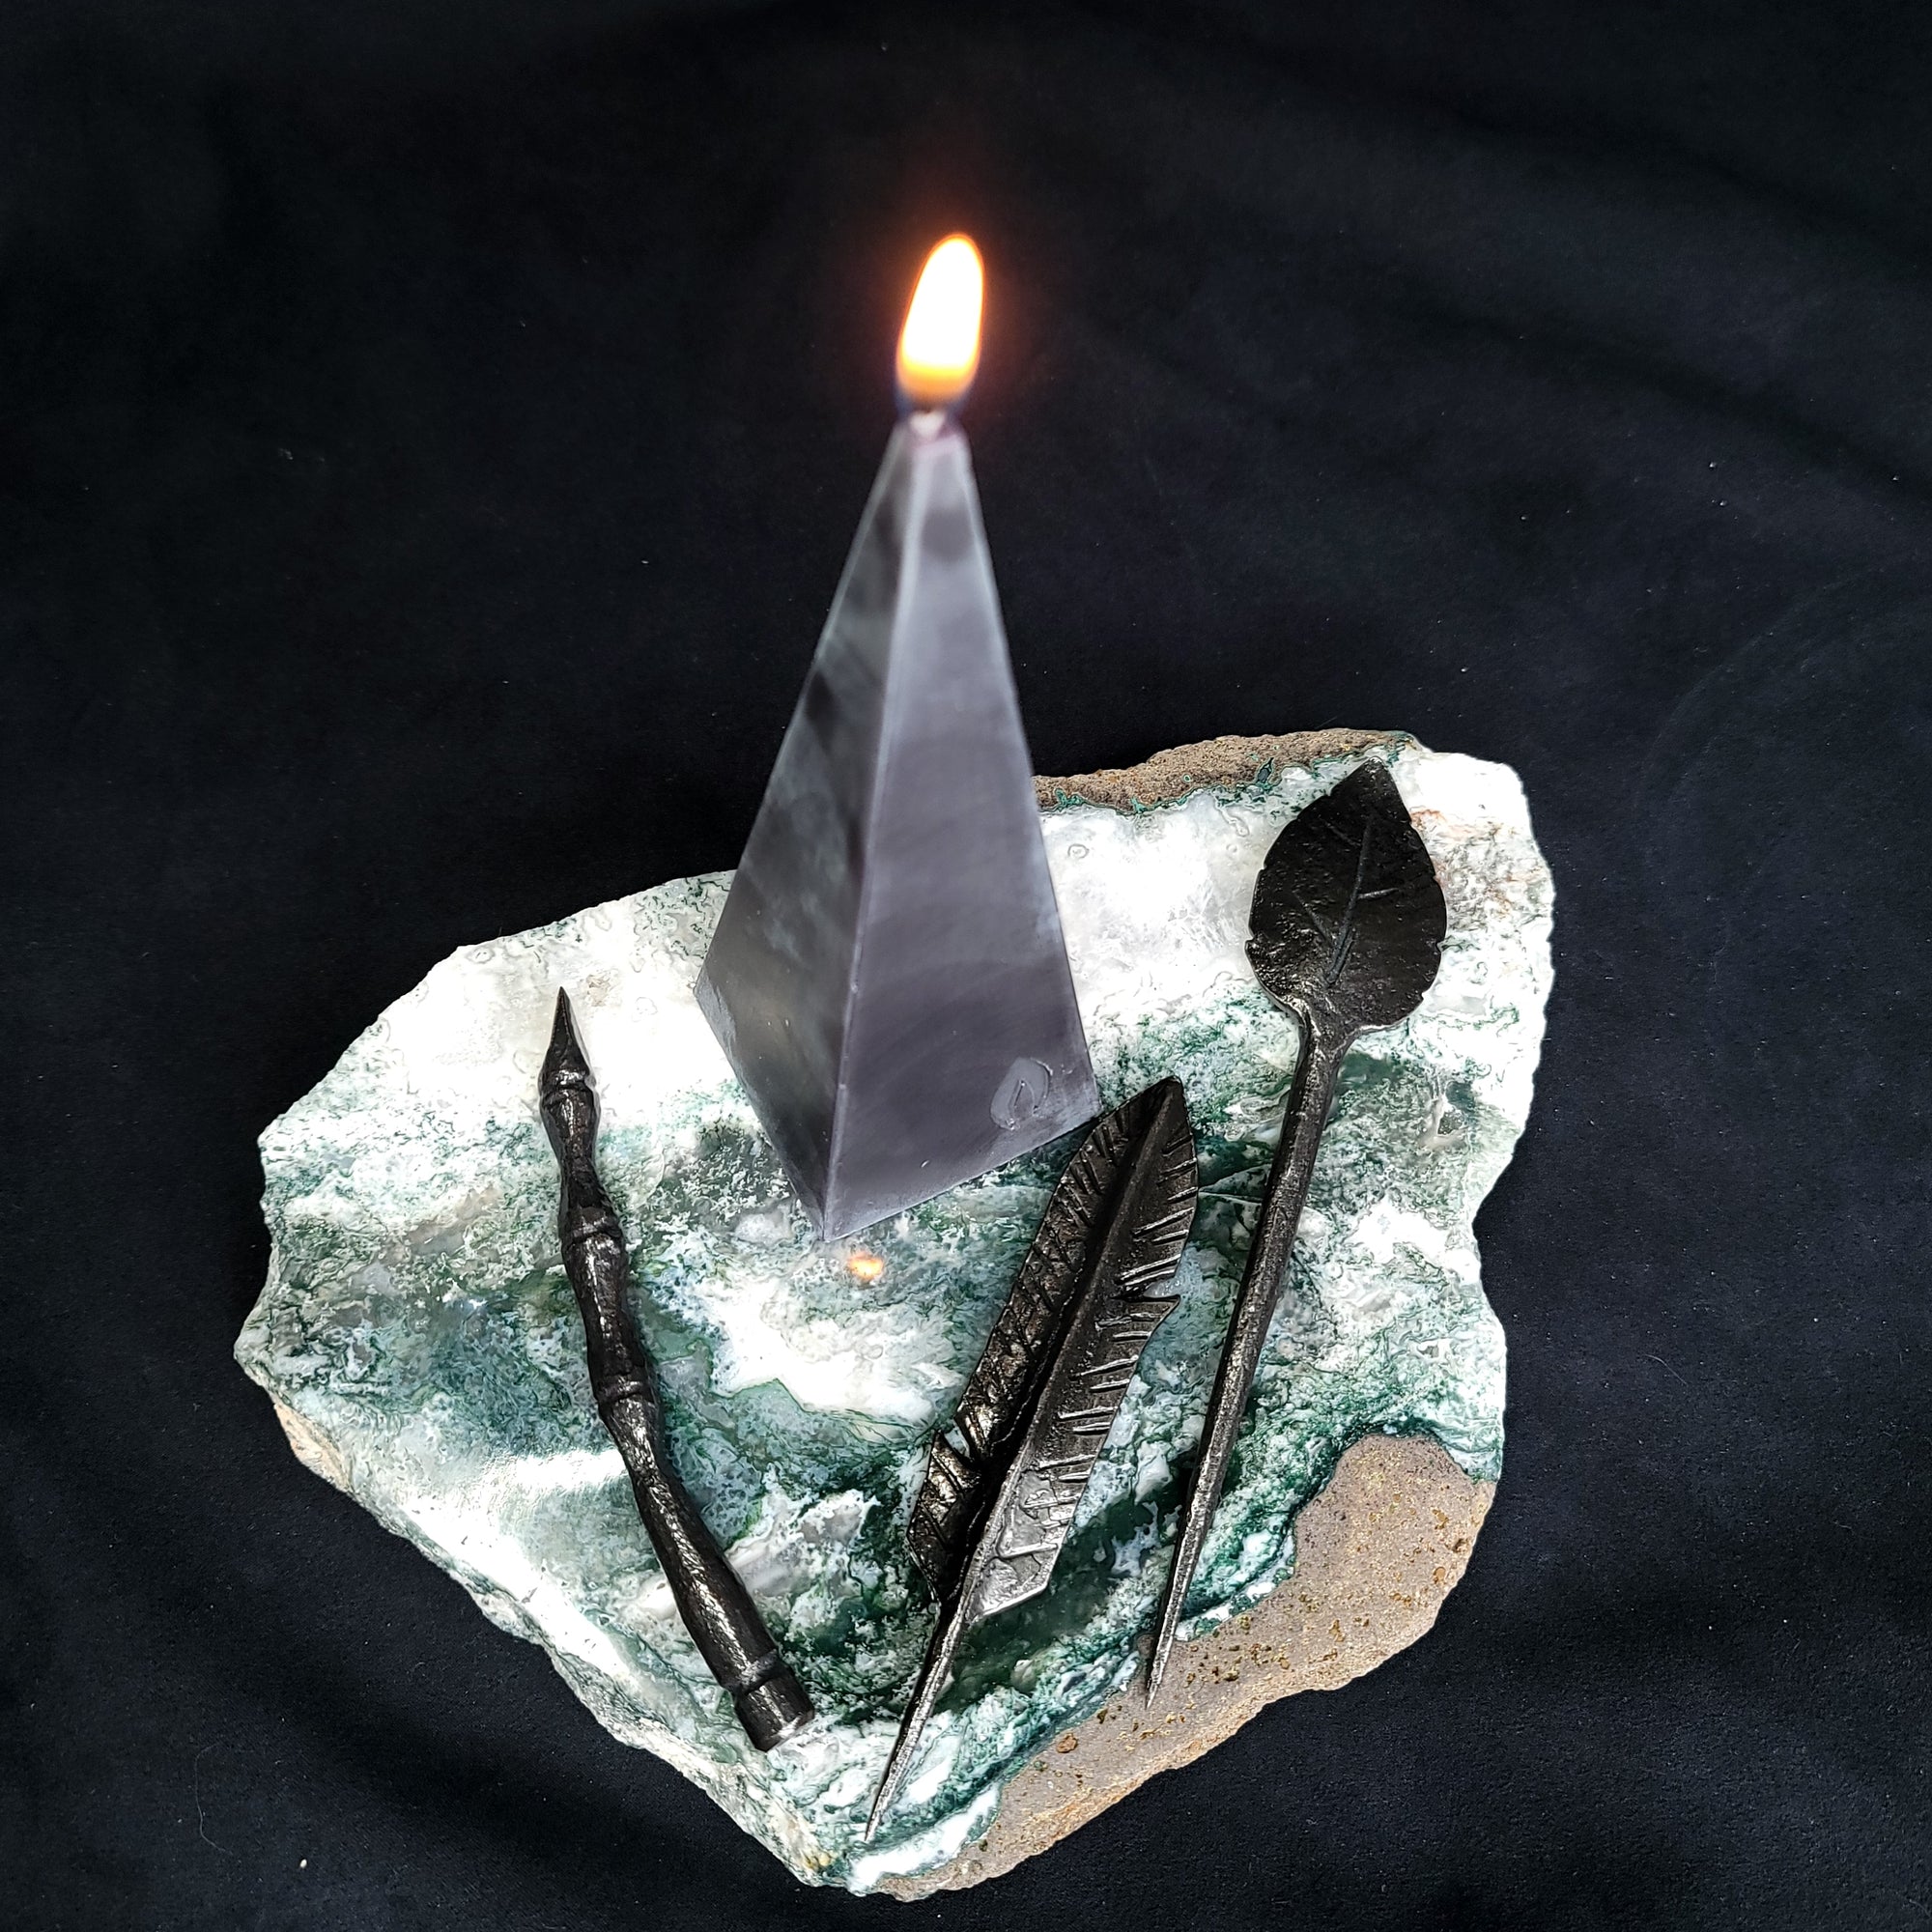 Candle Scribe (5 Designs)